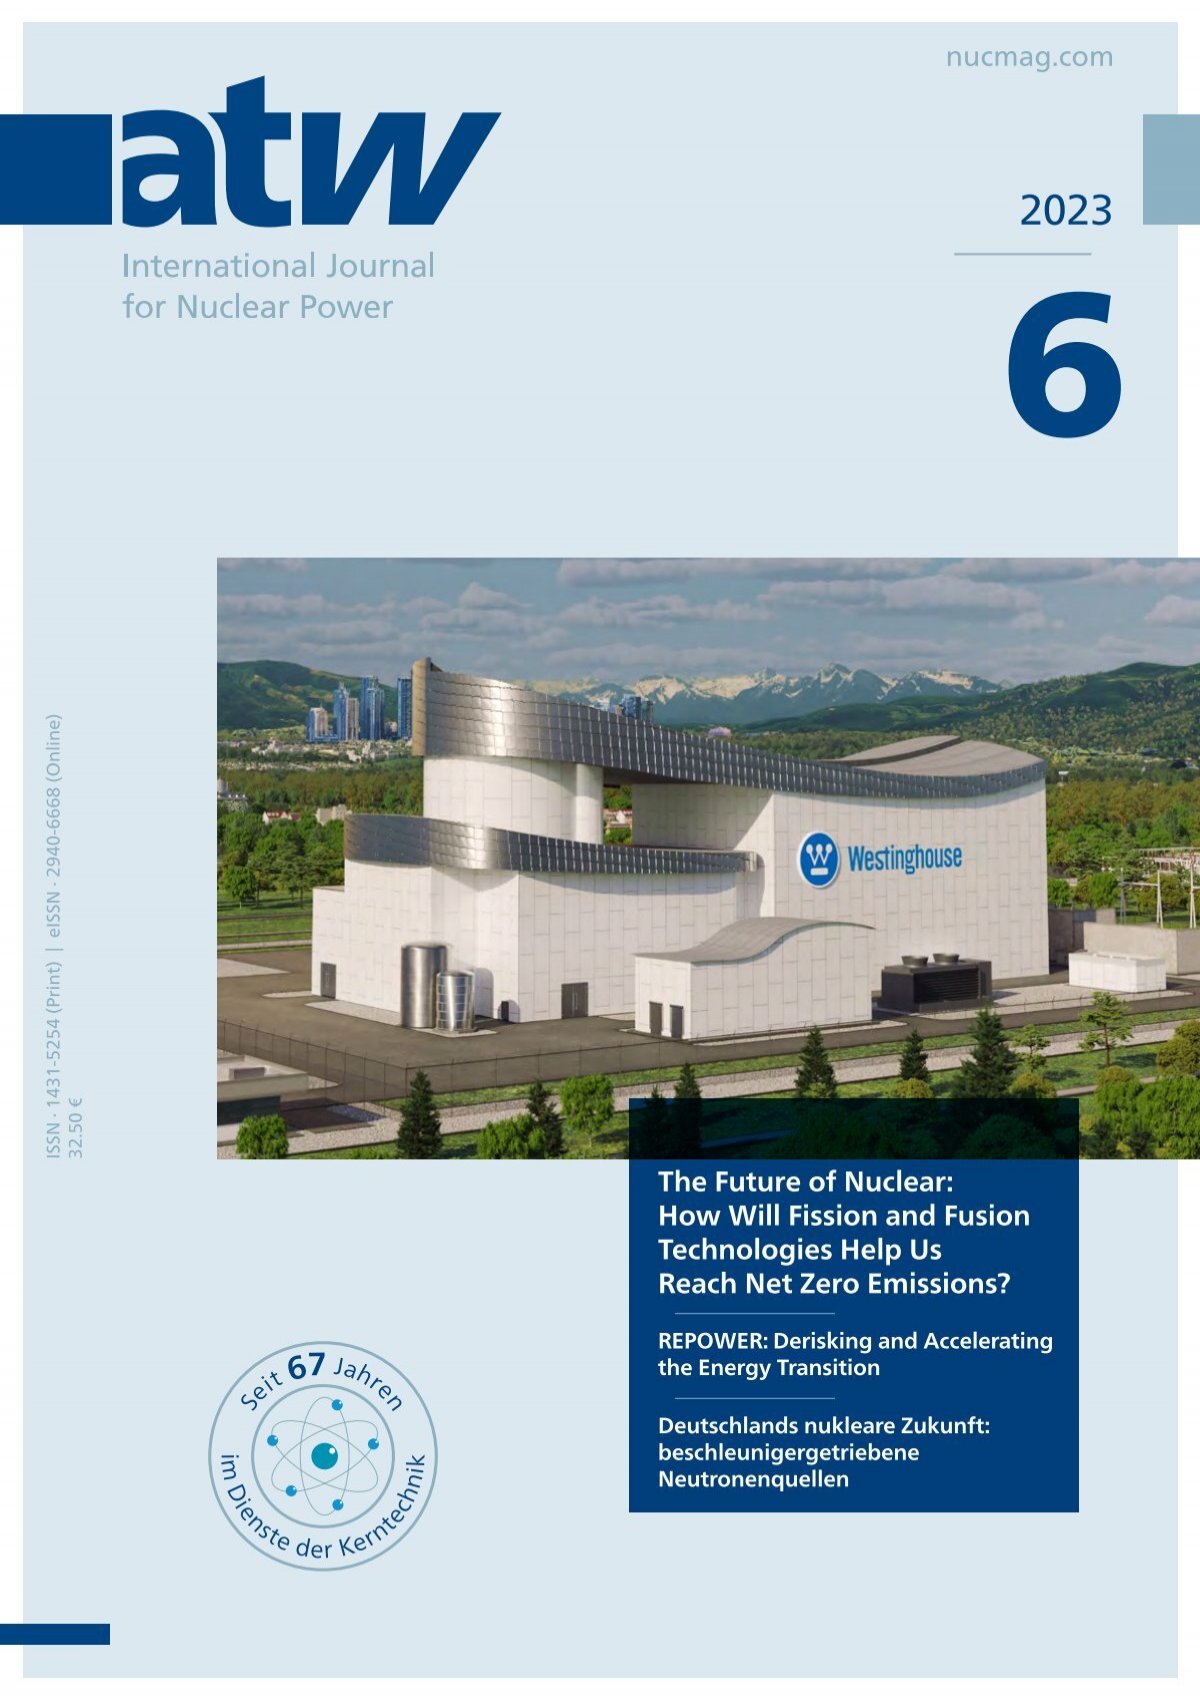 atw - International Journal for Nuclear Power